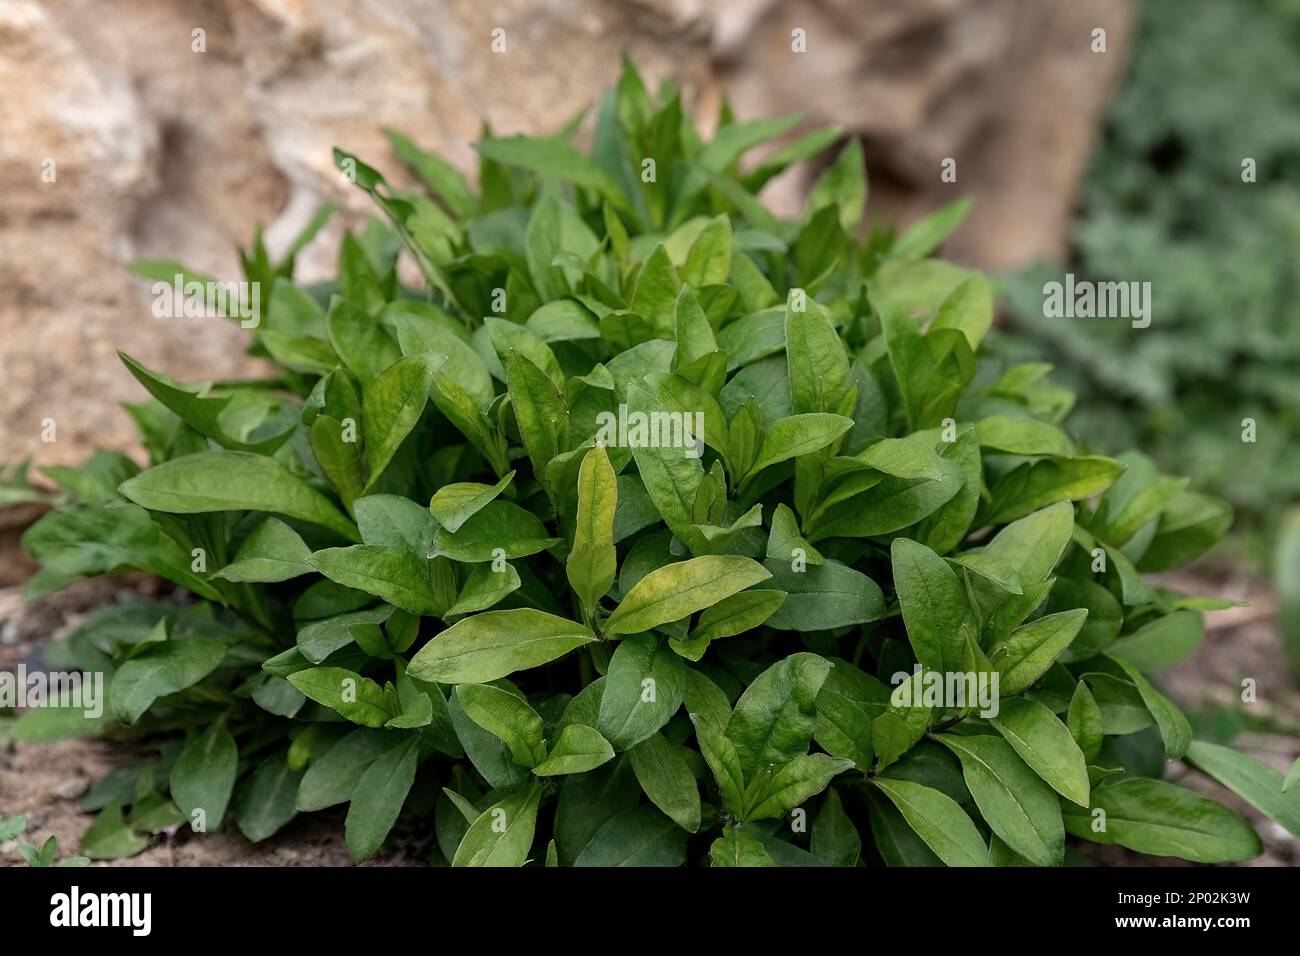 Phlox paniculate green leaves in the garden design Stock Photo